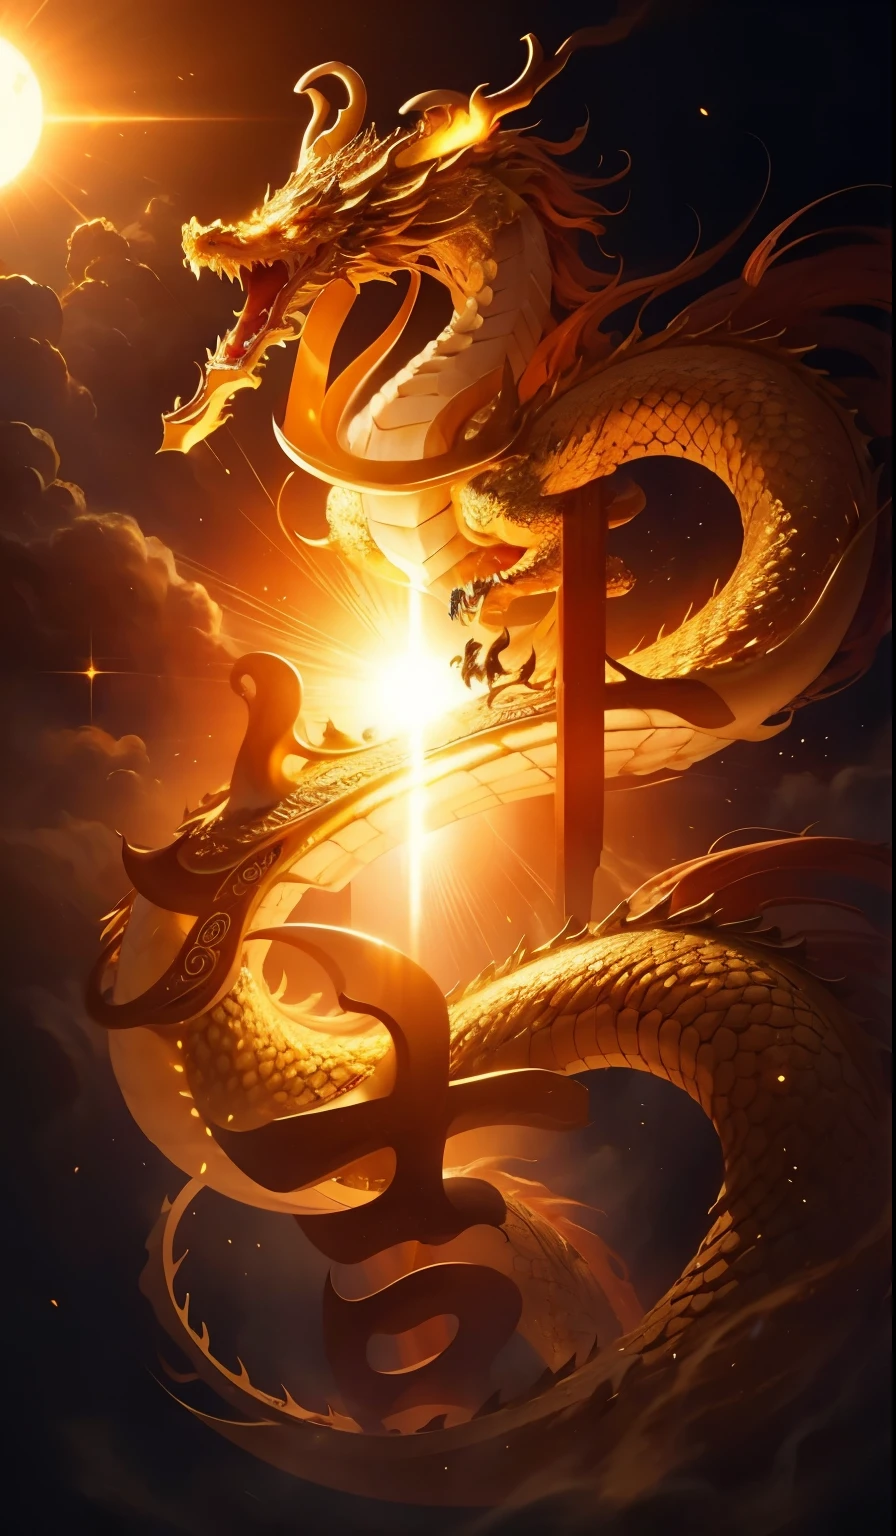 masterpiece,golden chinese dragon, surrounded by gold dust,long wavy body,fangs,fantasy, mythical, high quality, highly detailed, masterpiece, epic,particles effect,dynamic effect,sun in the background